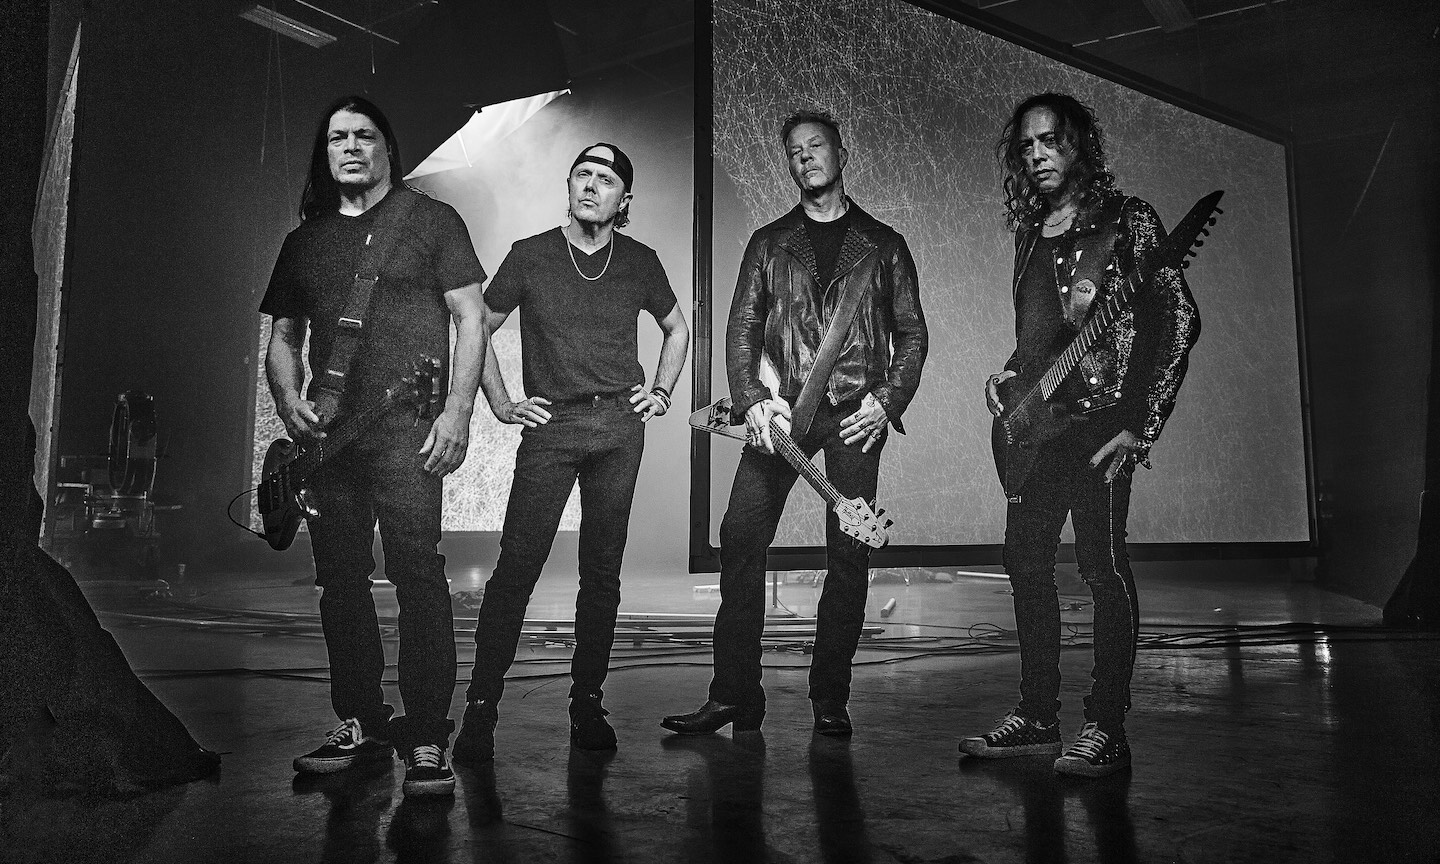 Tickets For Metallica's '72 Seasons Global Premiere' Are Now Available